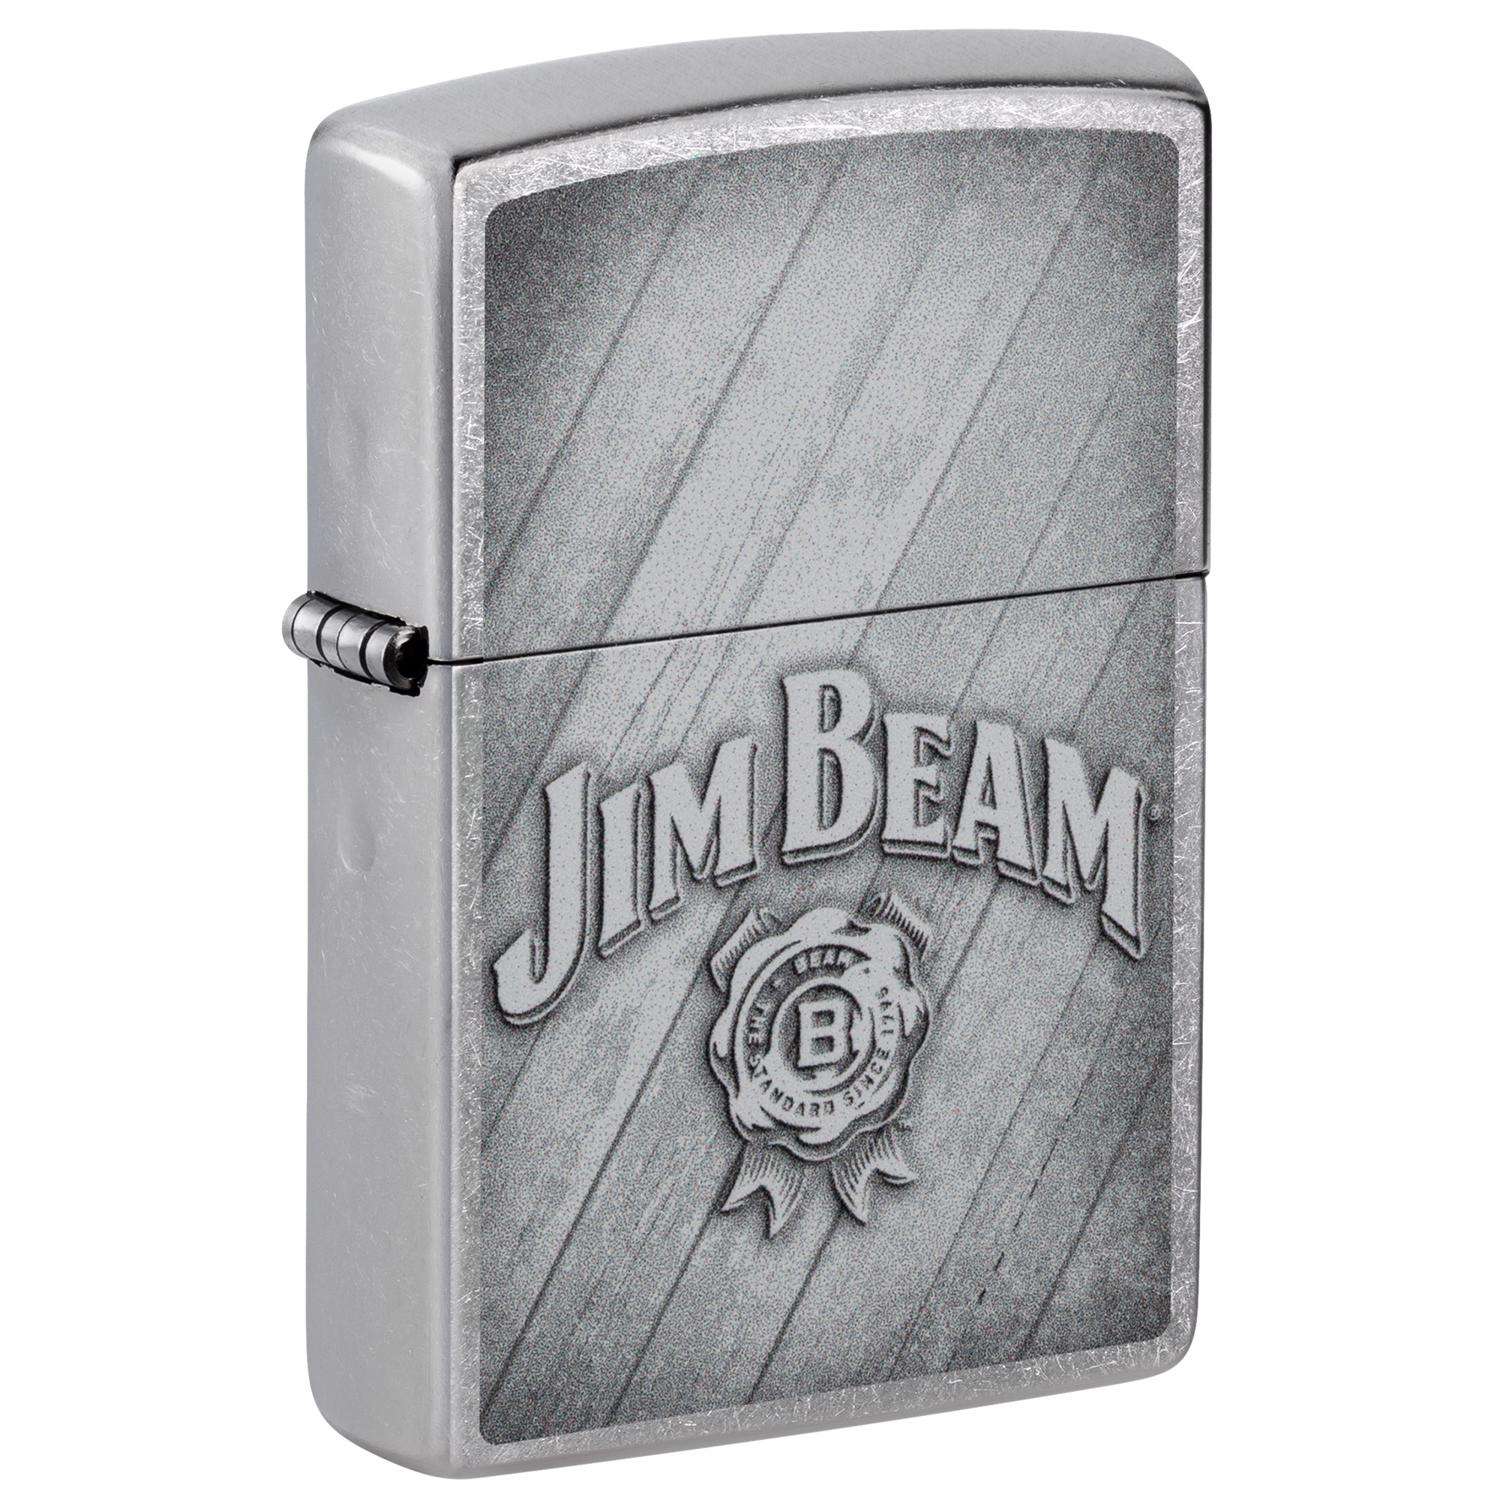 Check Out My Zippo Lighter Collection! Seeking Opinions and Valuations : r/ Zippo